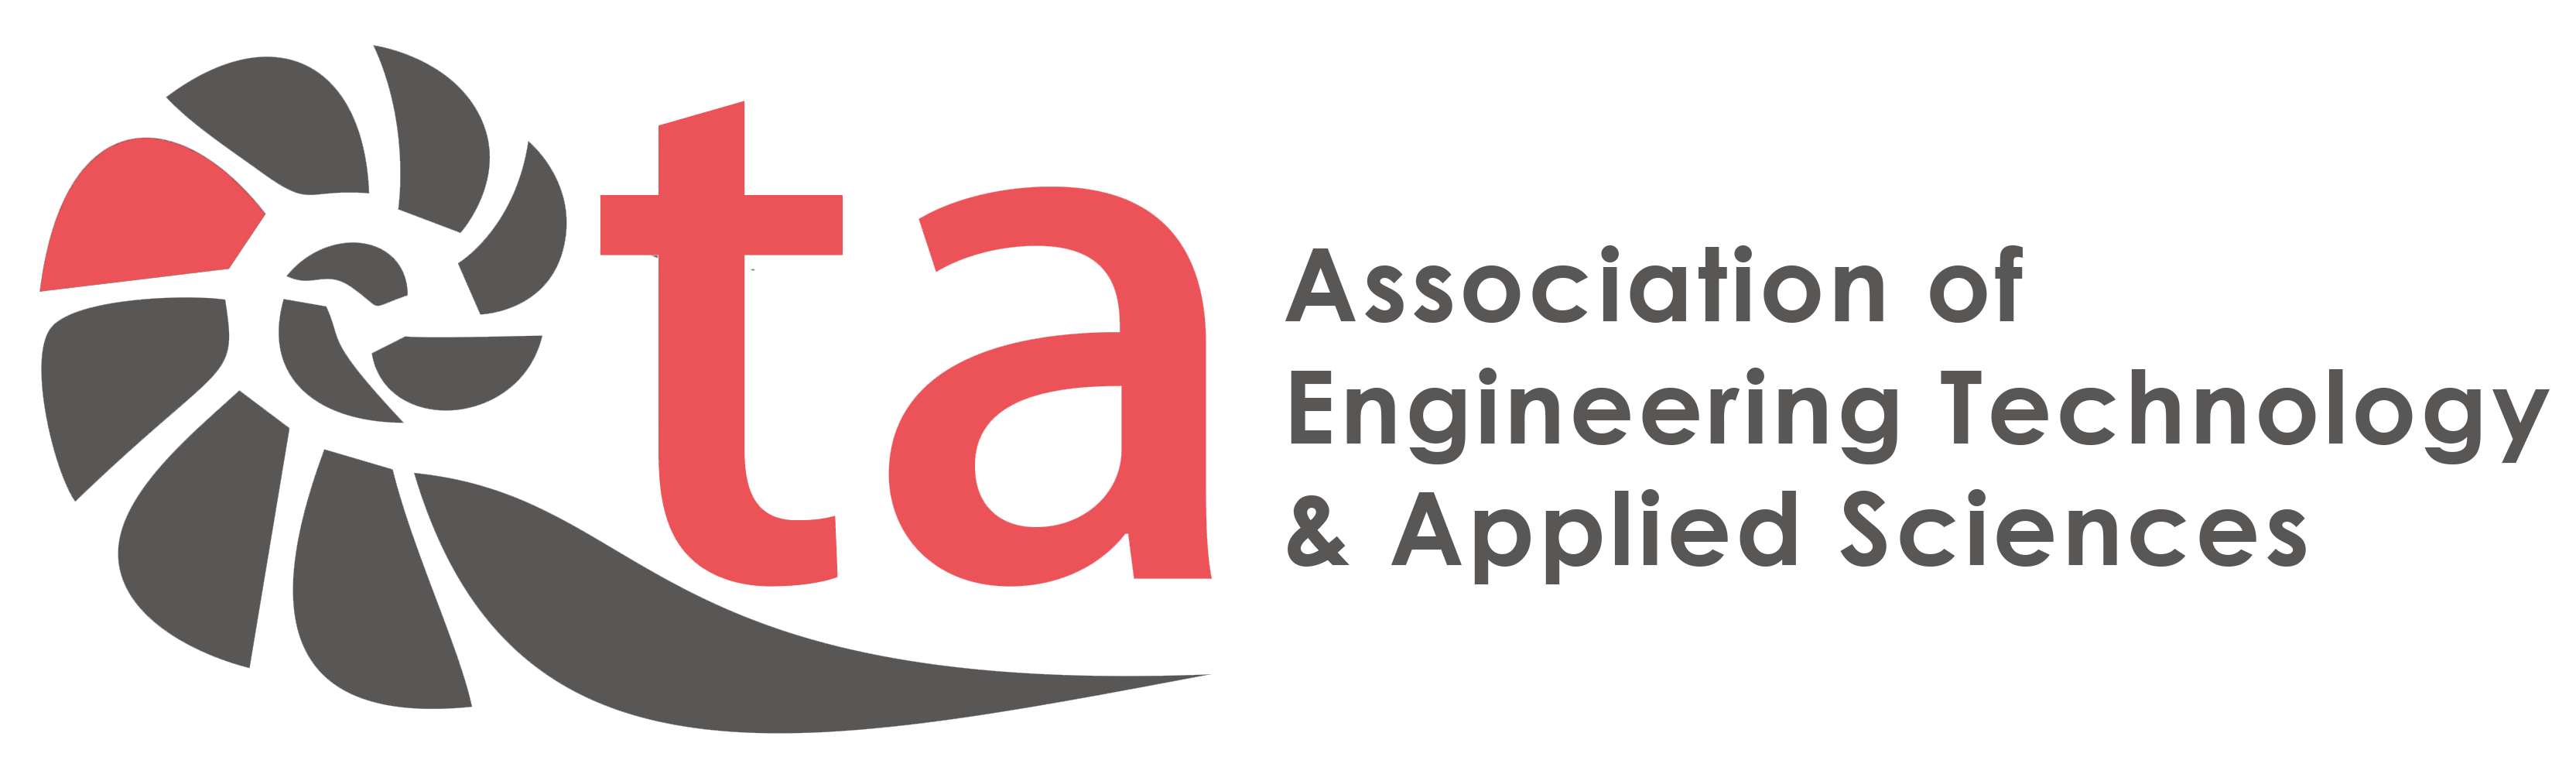 AETA International Conference on Machine Learning, Applied Sciences, Information Technology, Artificial Intelligence & Engineering  (MAIE)